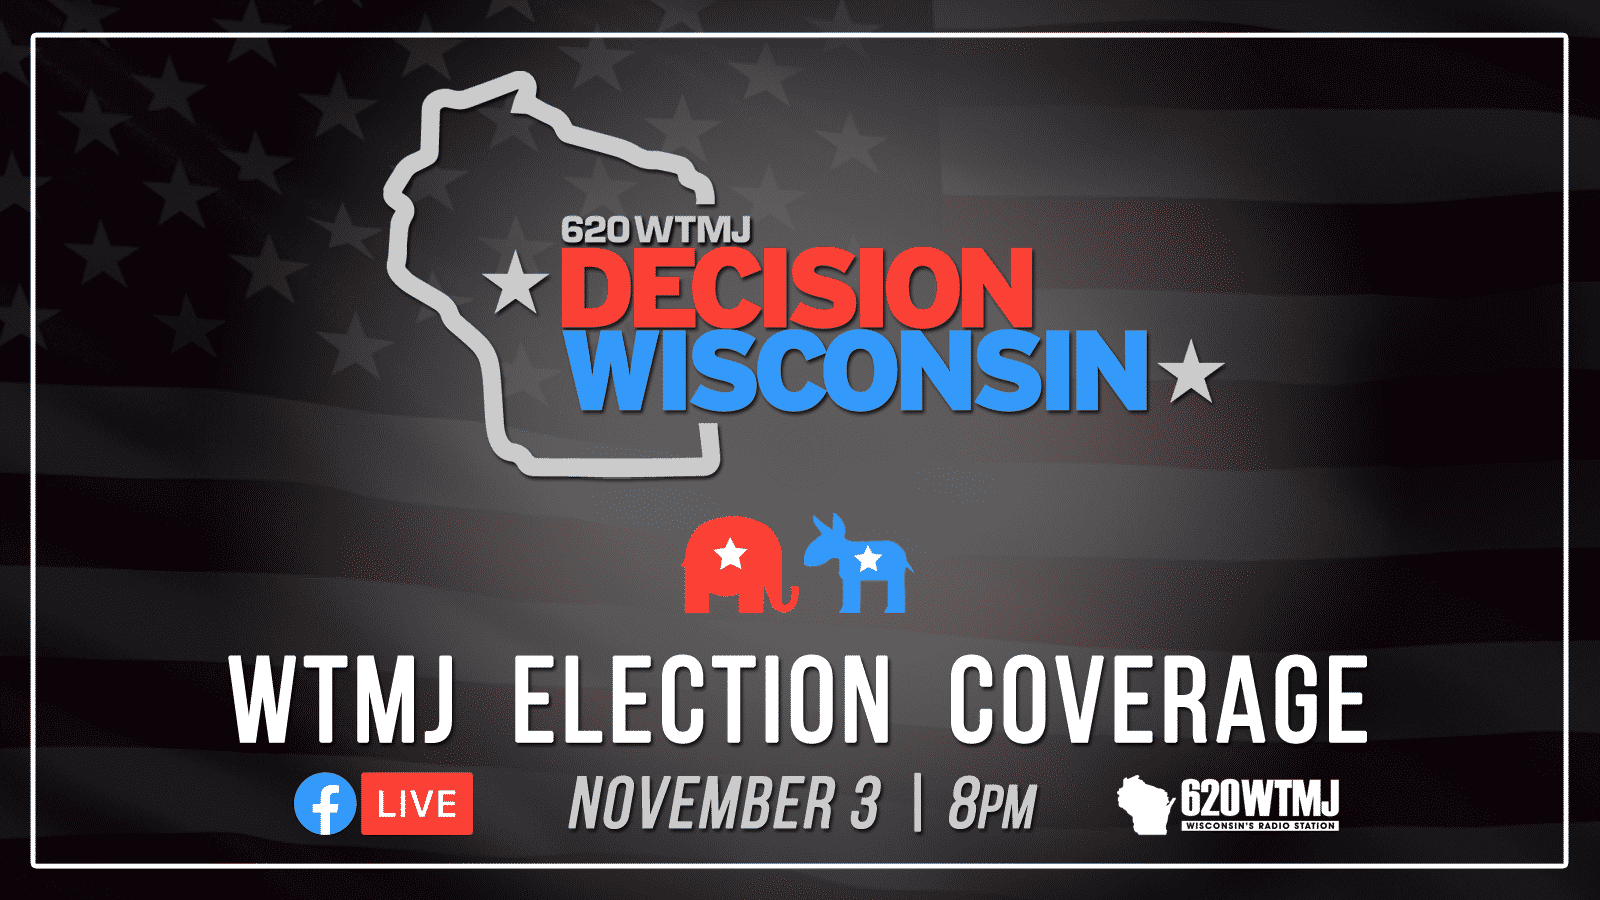 Everything you need to know about voting on Election Day WTMJ